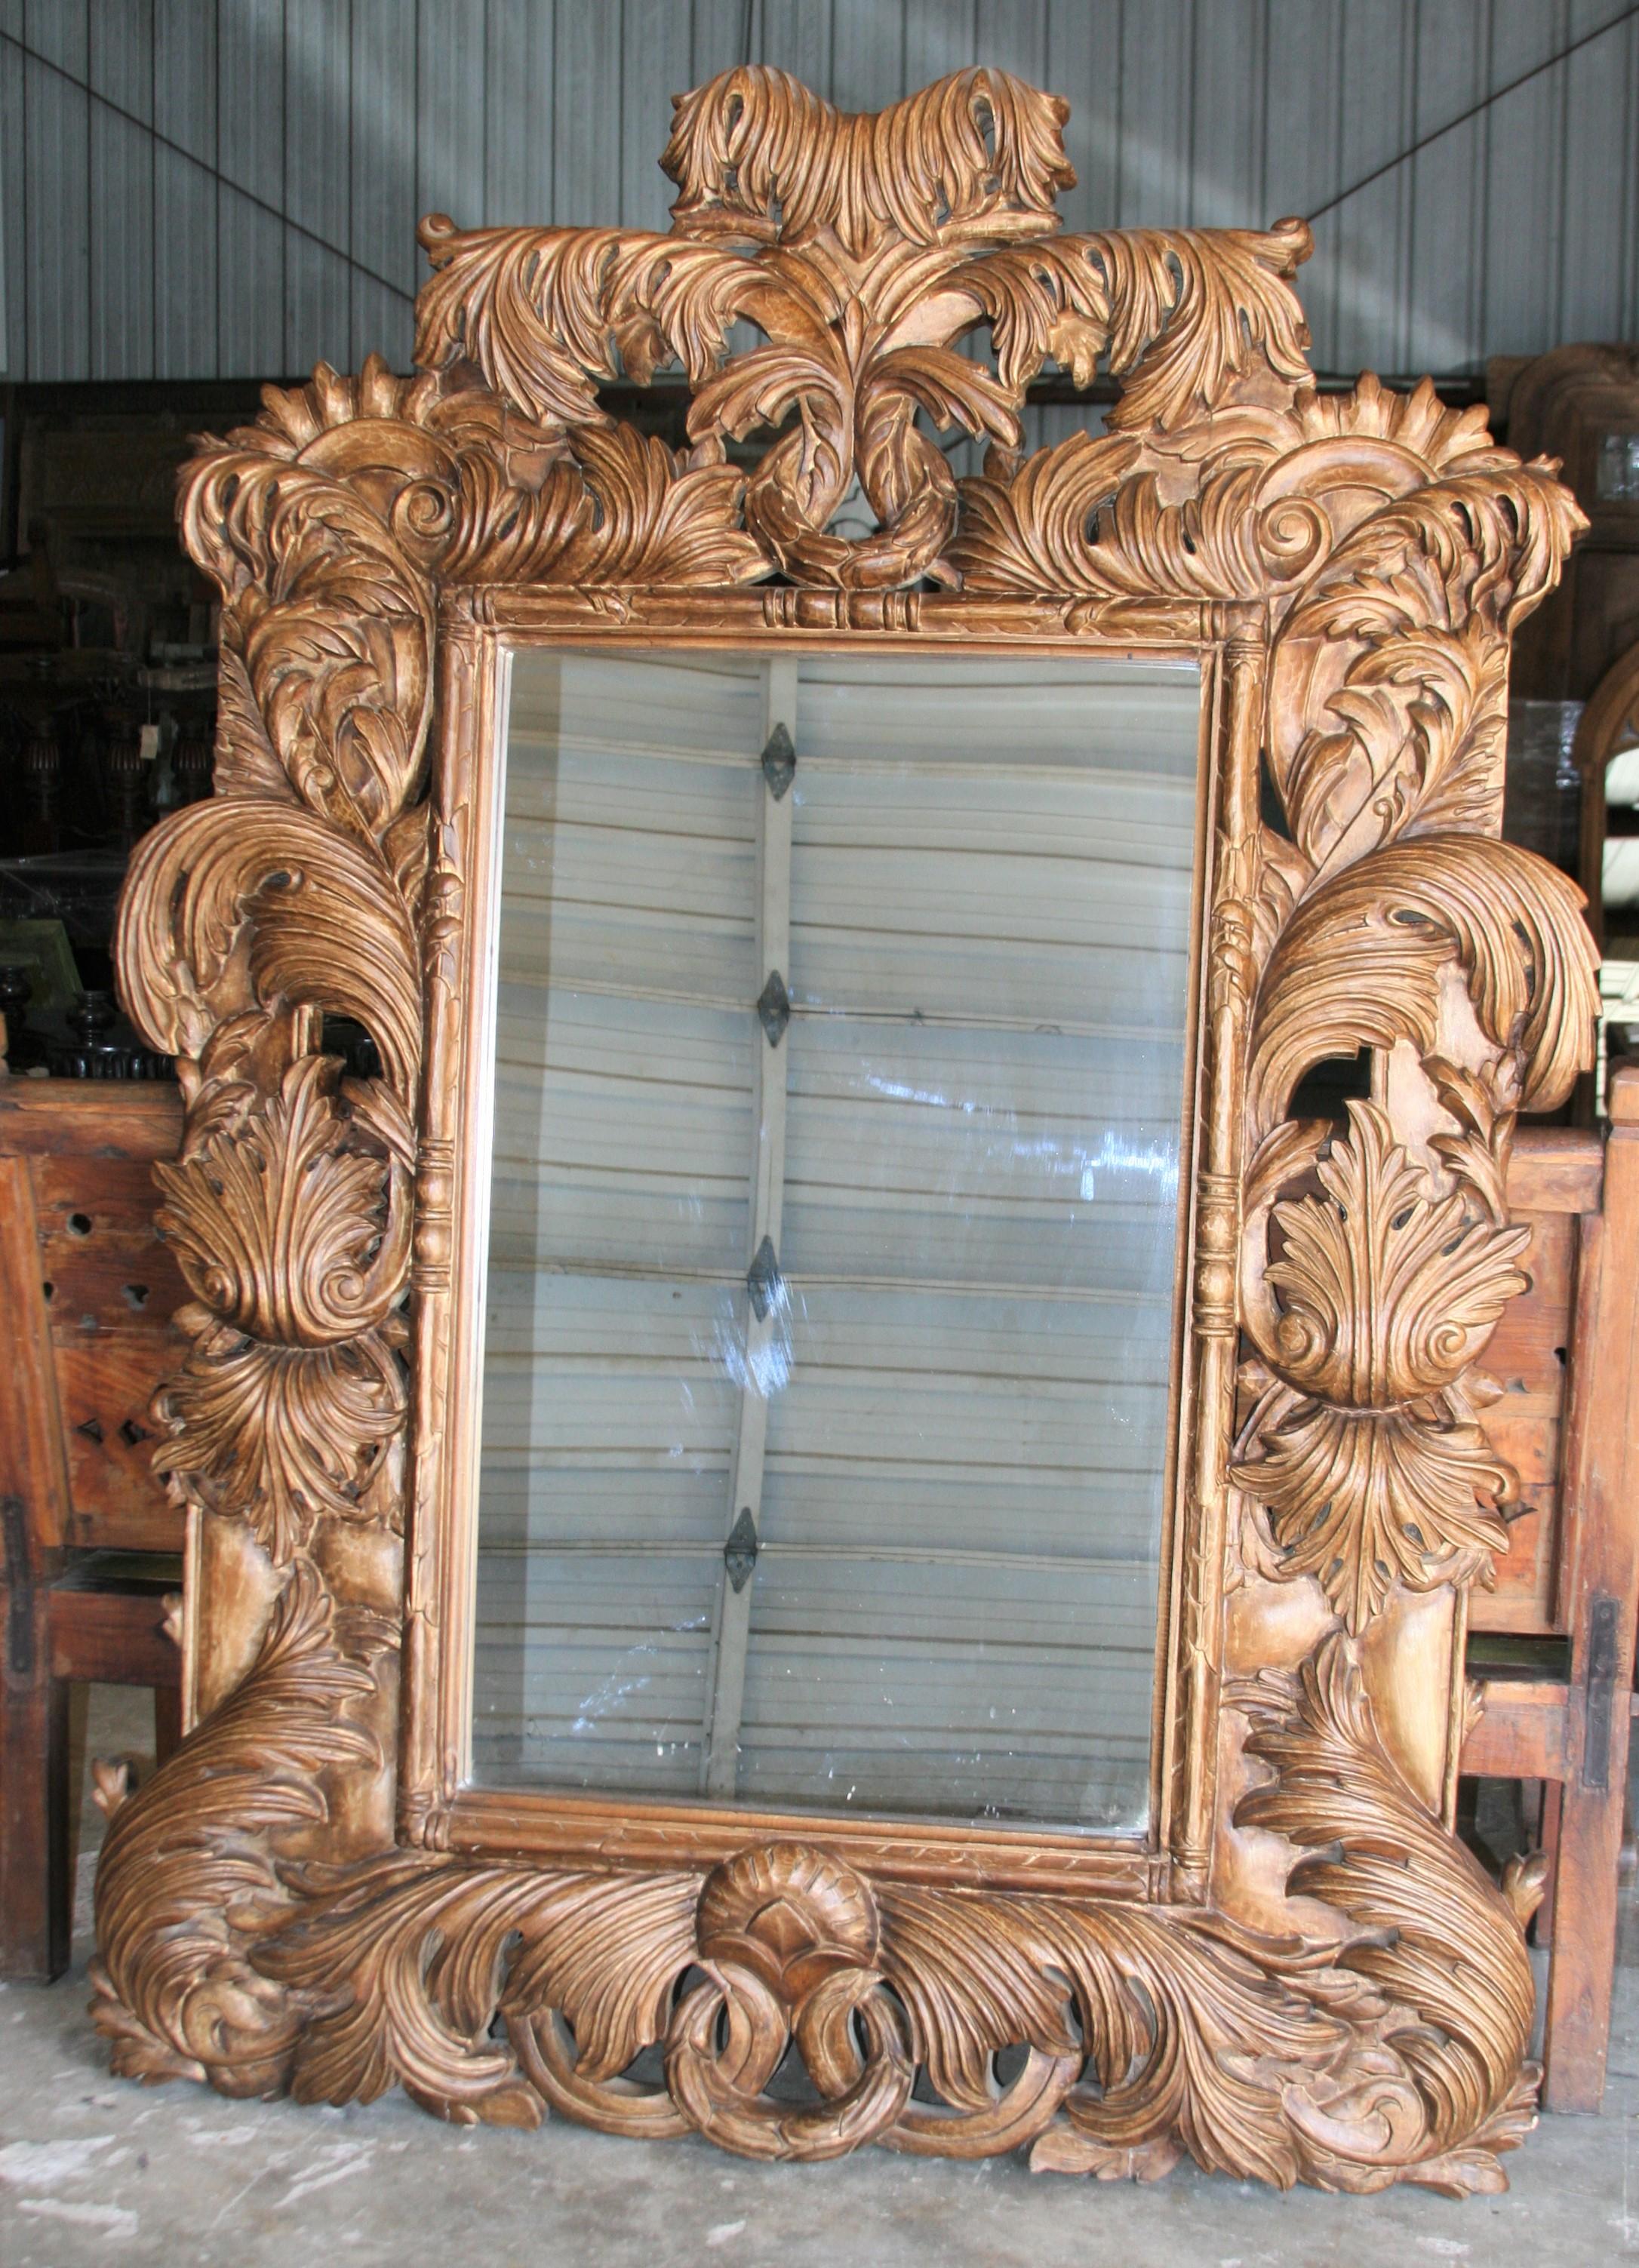 An exceptional custom hand carved mirror in hard Sheesham wood. This mirror is large and heavy. Inimitable carving and finish. It would be difficult to find another one like this in the market. See the close ups of the details to appreciate the work